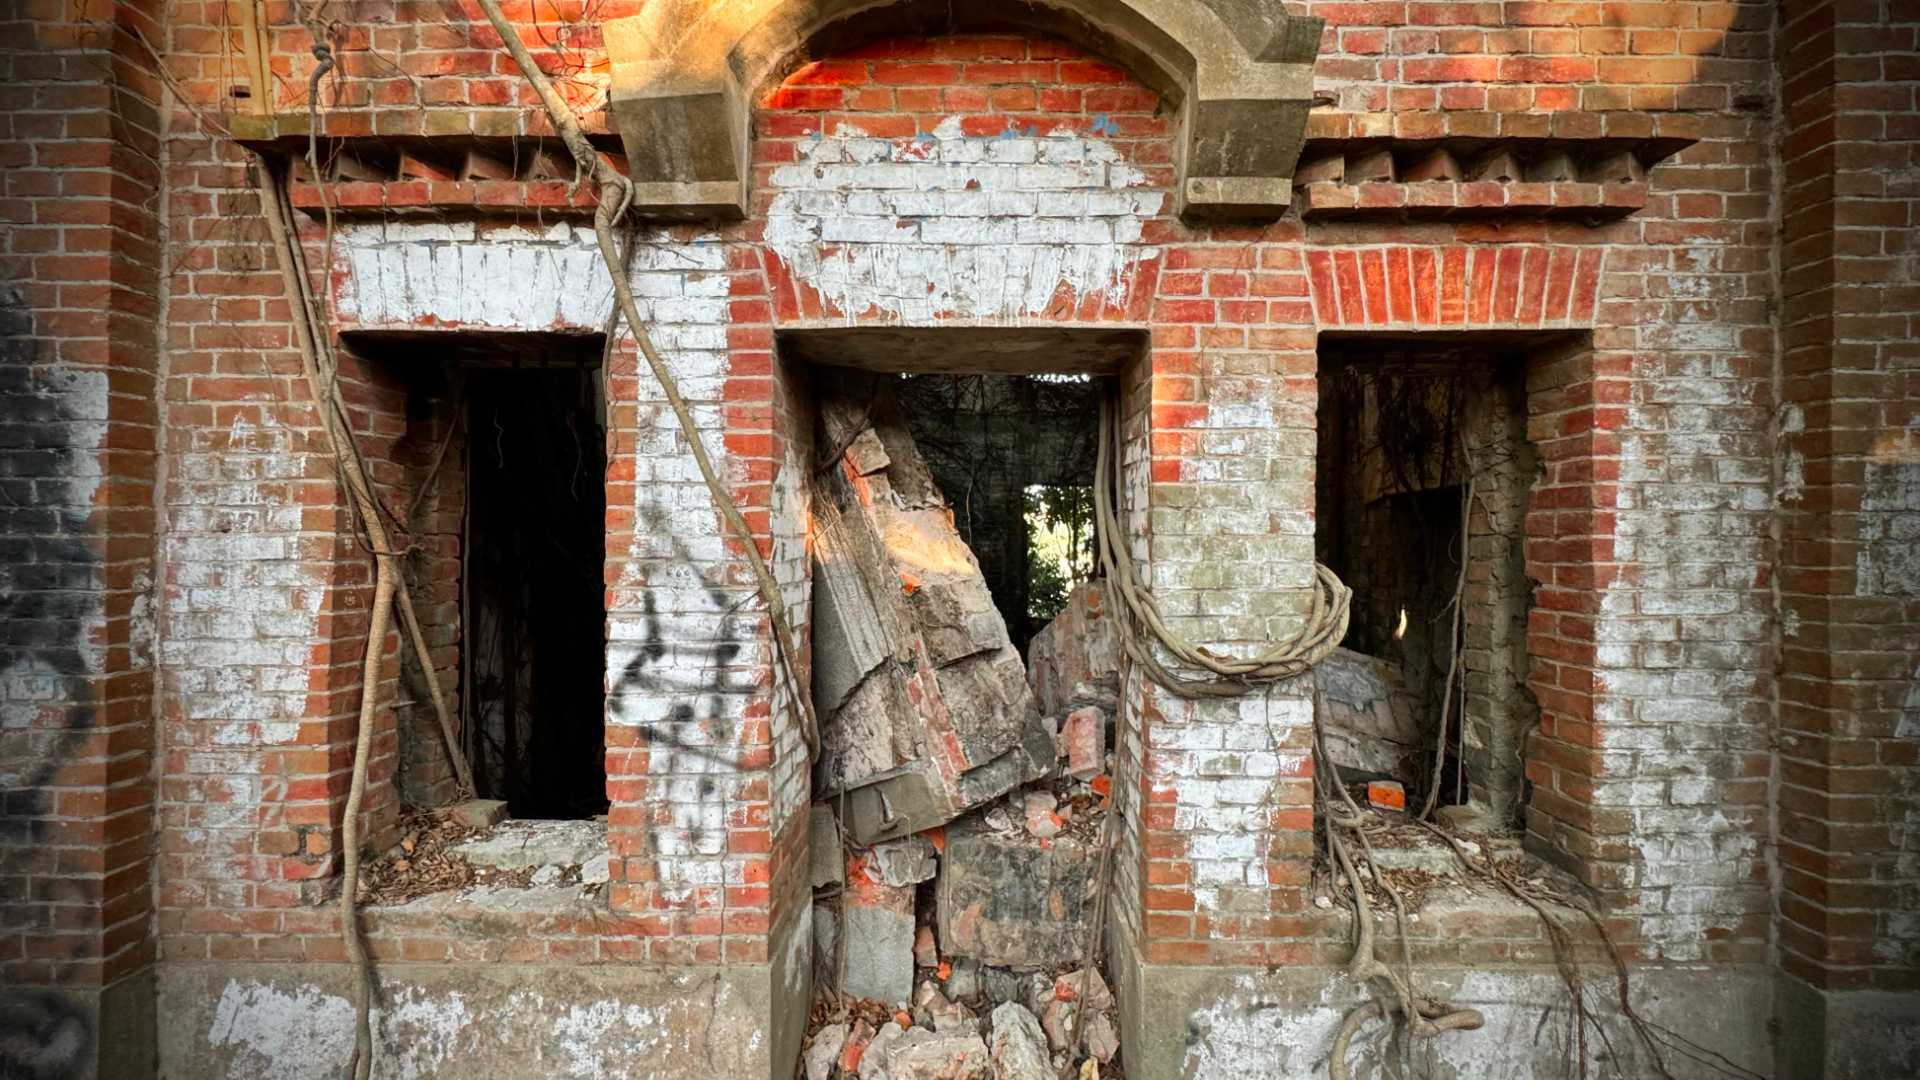 Close-up of the entranceway of Minxiong Haunted House. The doors and windows are missing. The doorway is filled with rubble.